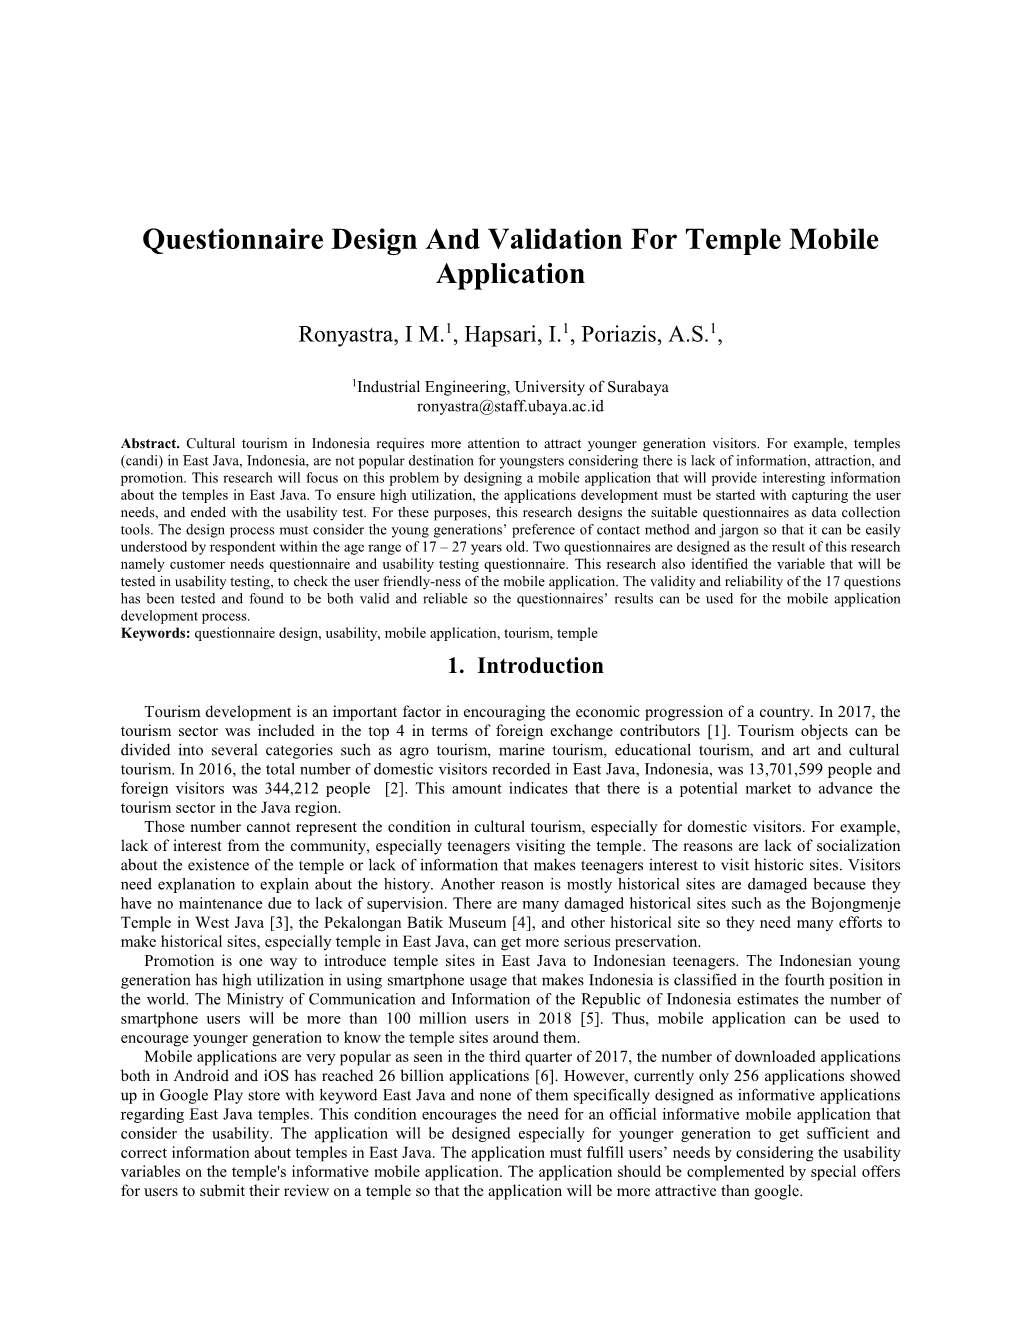 Questionnaire Design and Validation for Temple Mobile Application